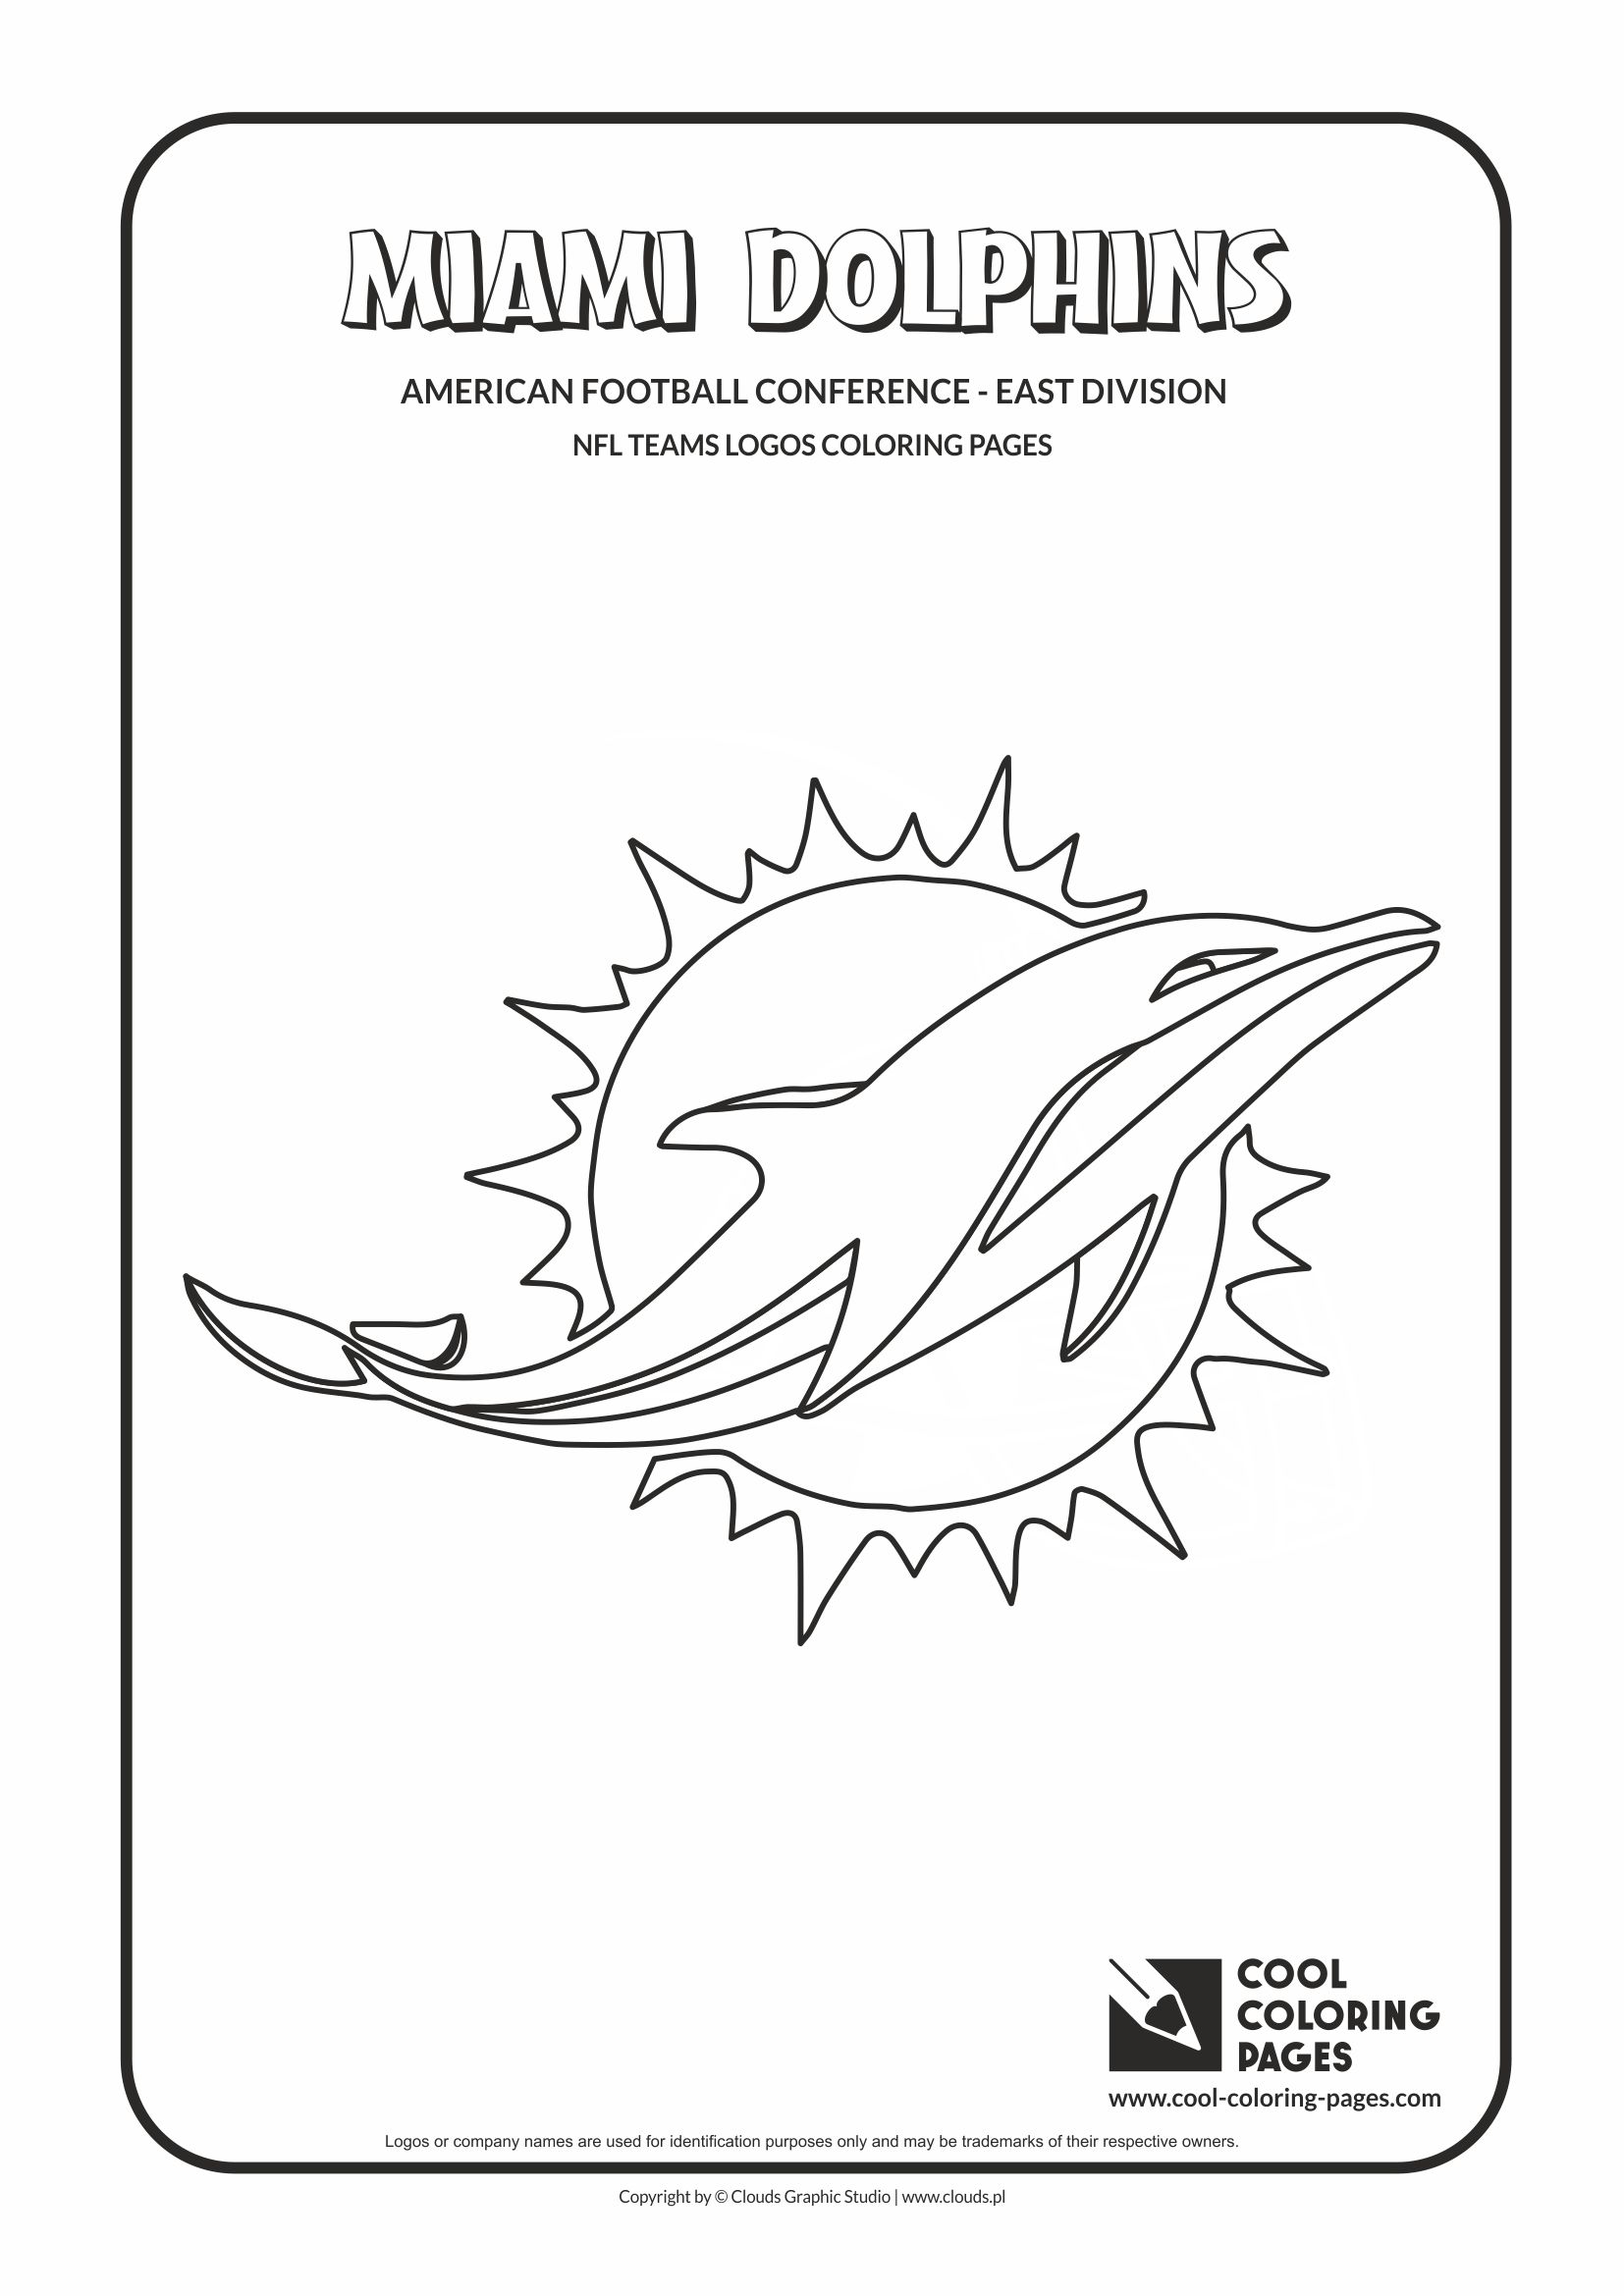 Cool Coloring Pages - NFL American Football Clubs Logos - American Football Conference - East Division / Miami Dolphins logo / Coloring page with Miami Dolphins logo